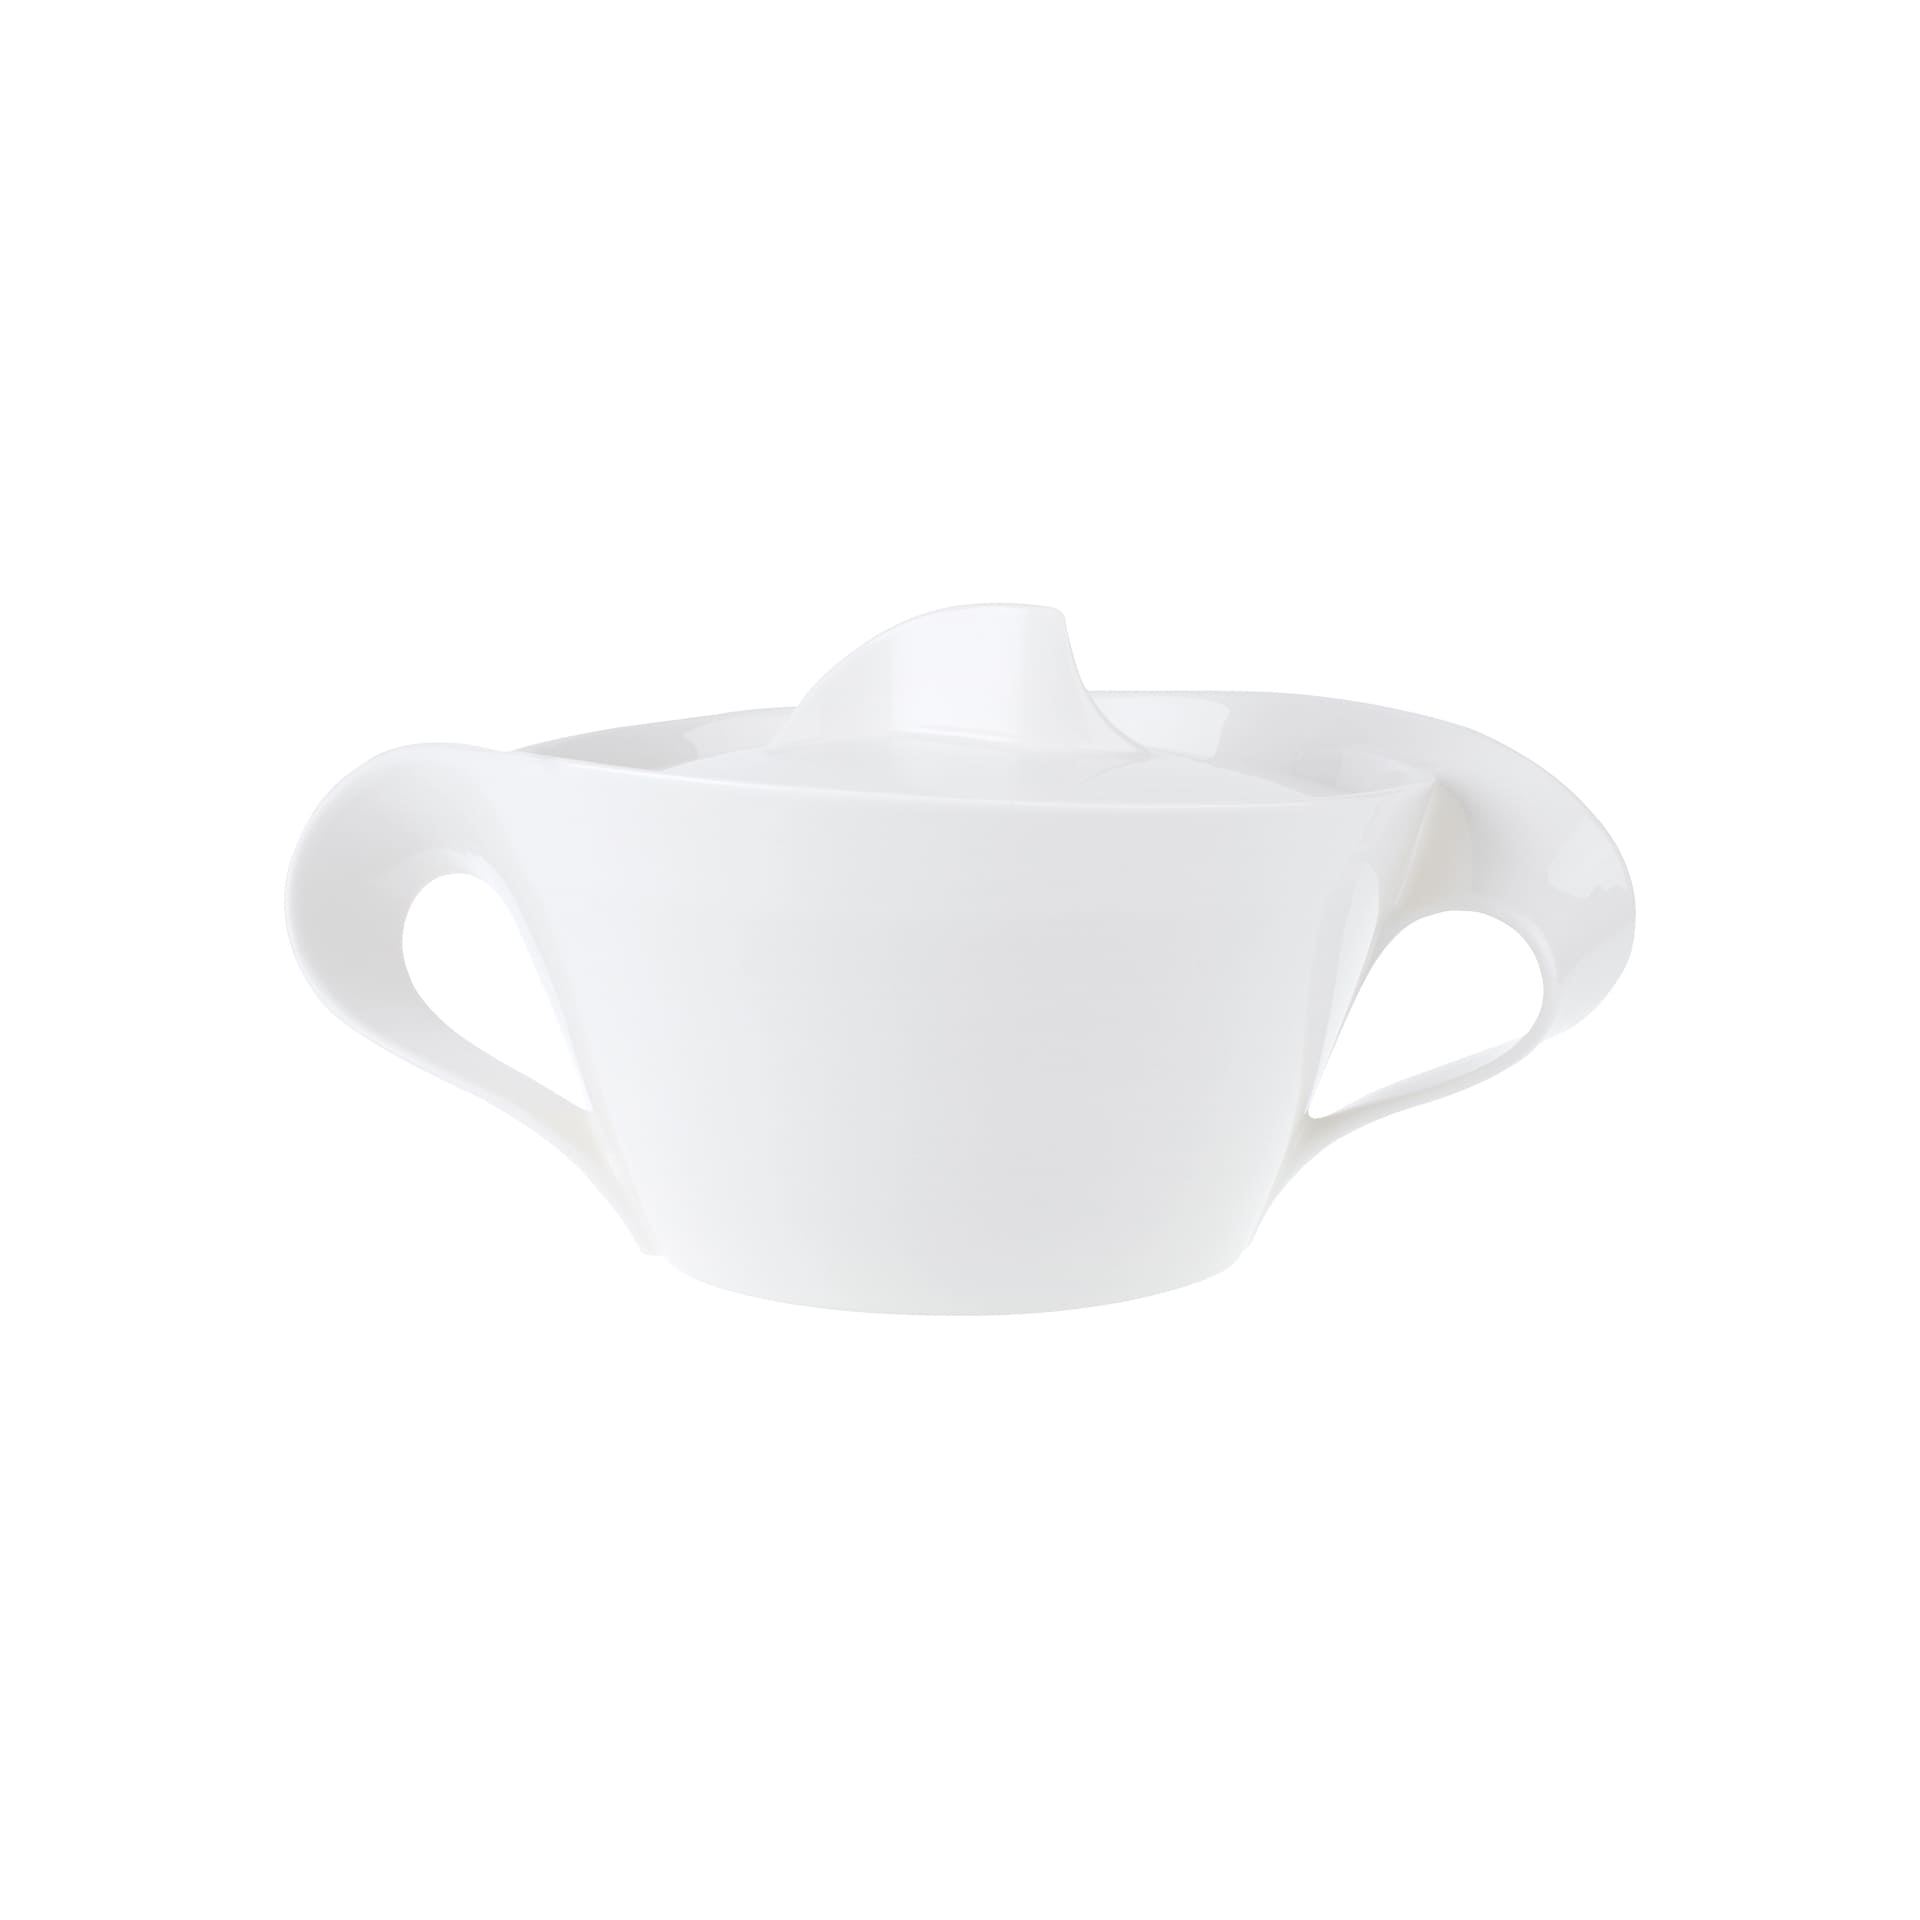 NewWave bowl with lid VilleroyBoch